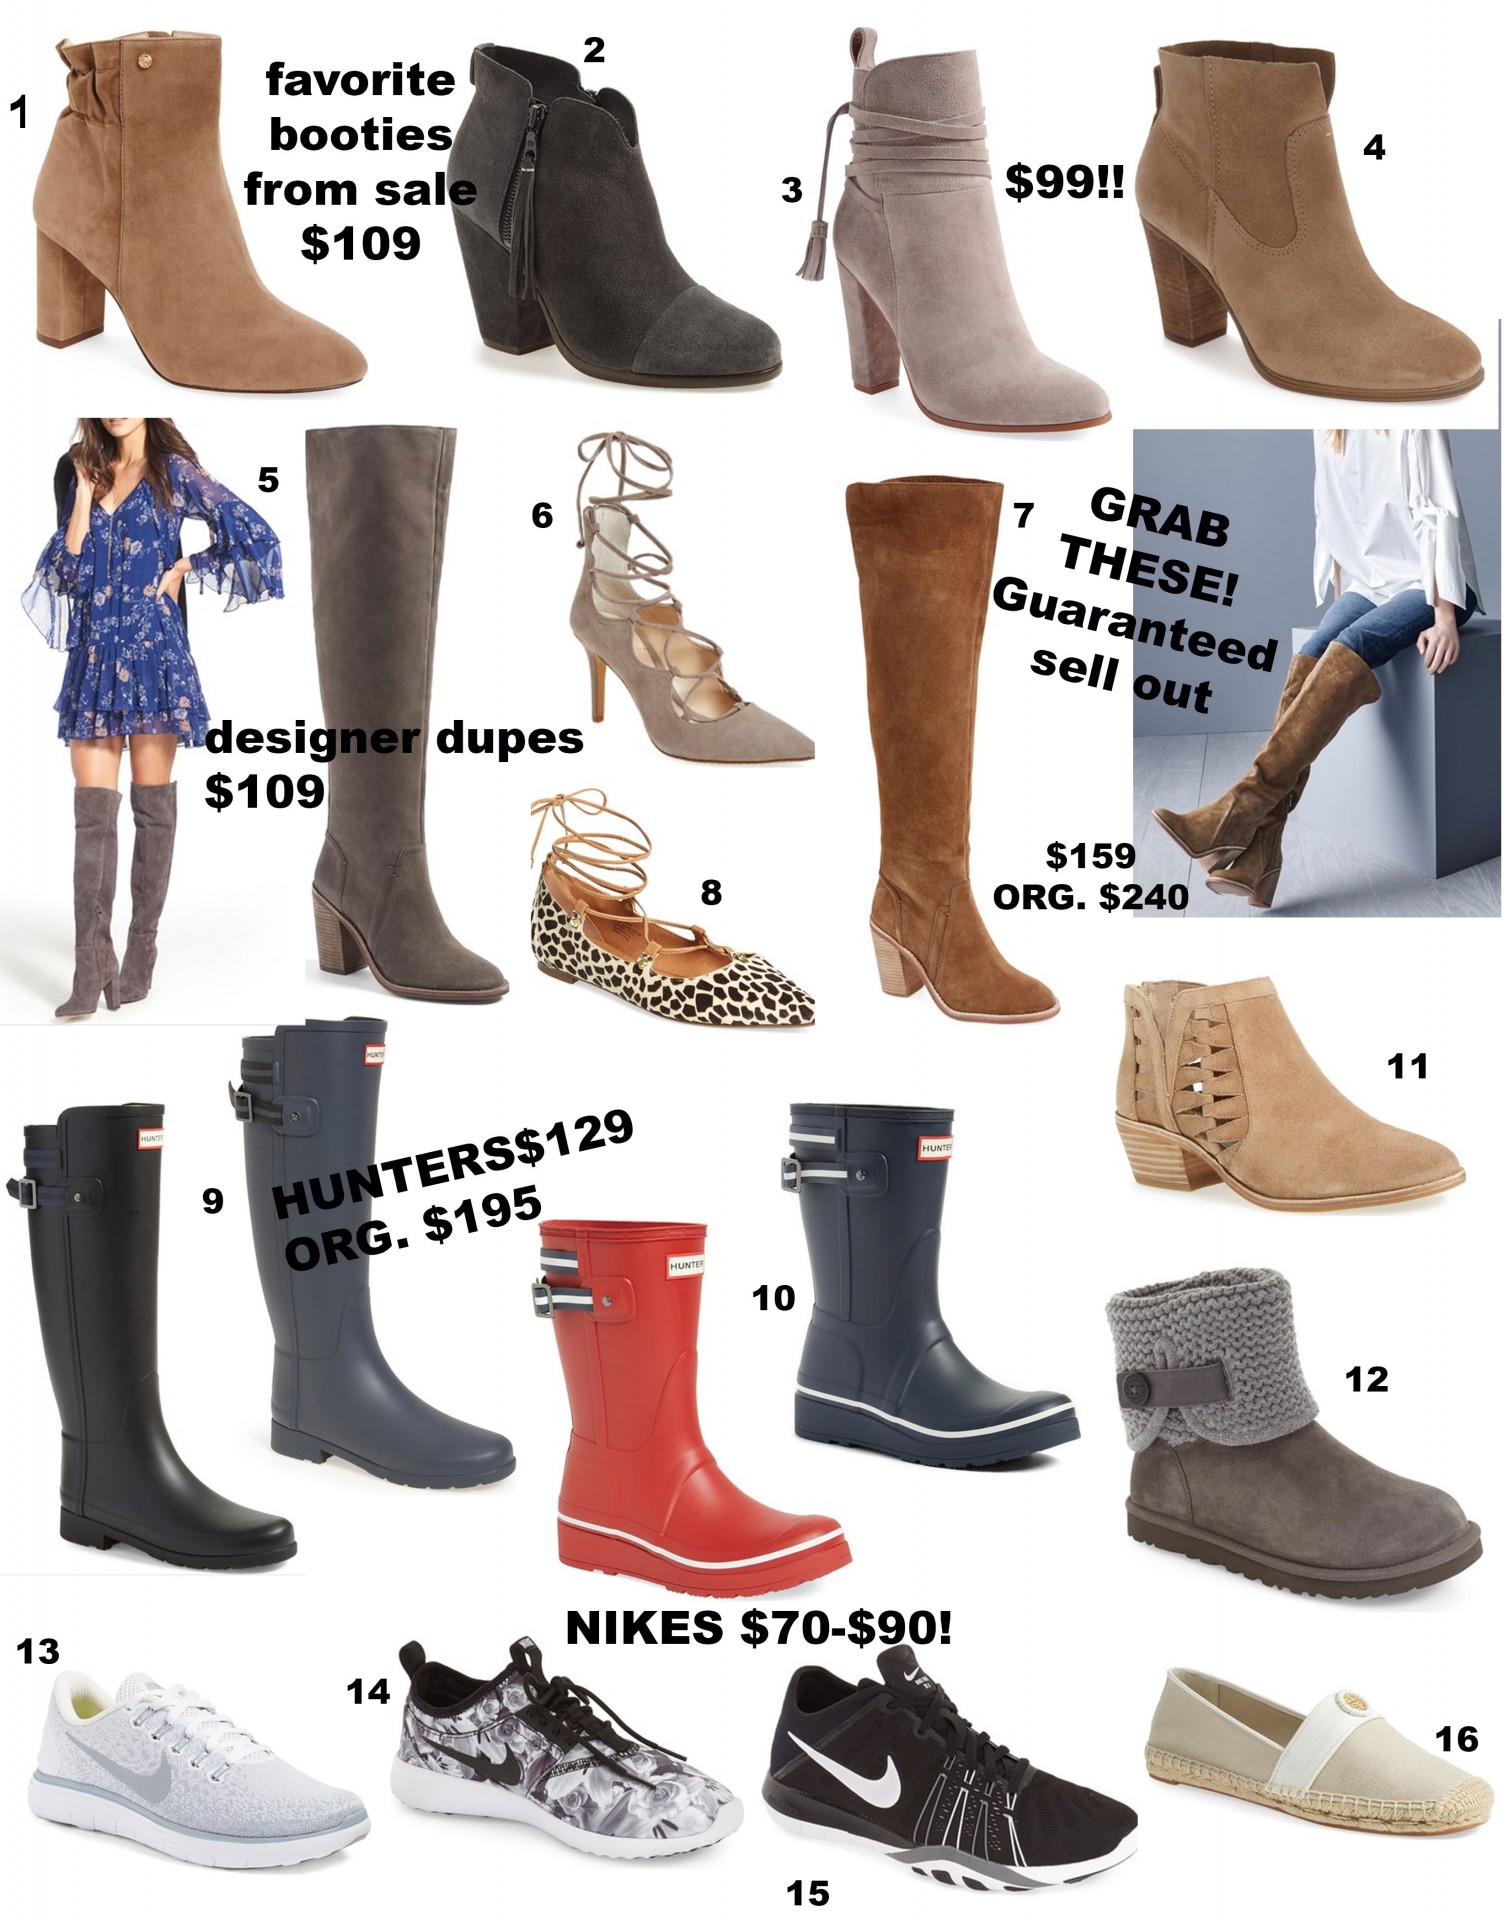 nordstrom anniversary sale shoes